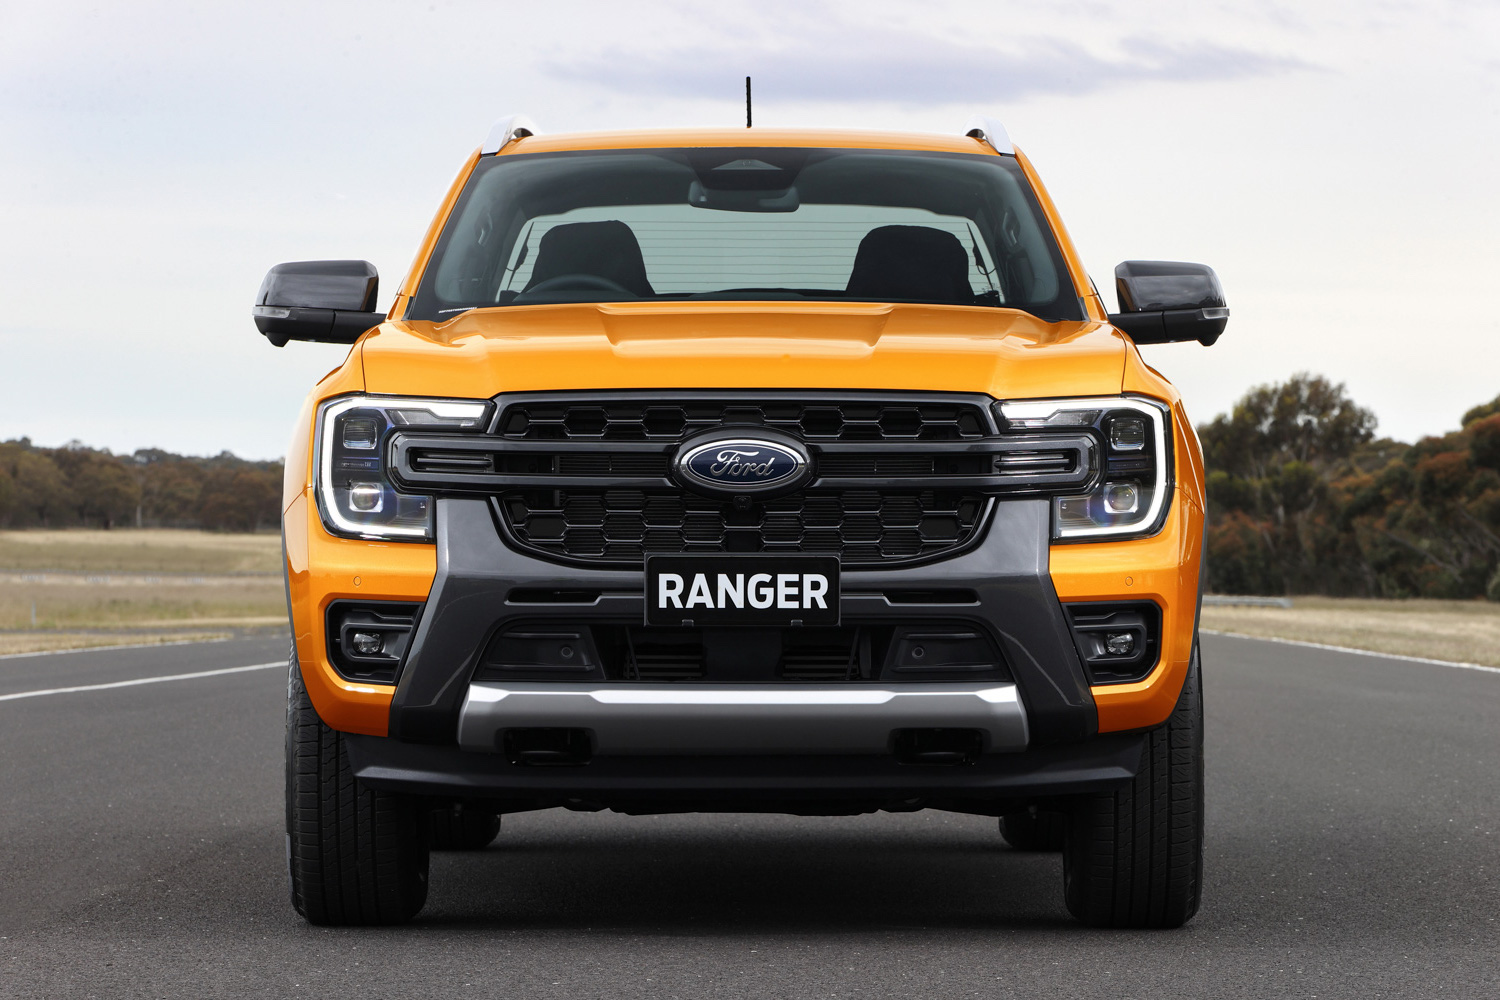 New Ford Ranger front view